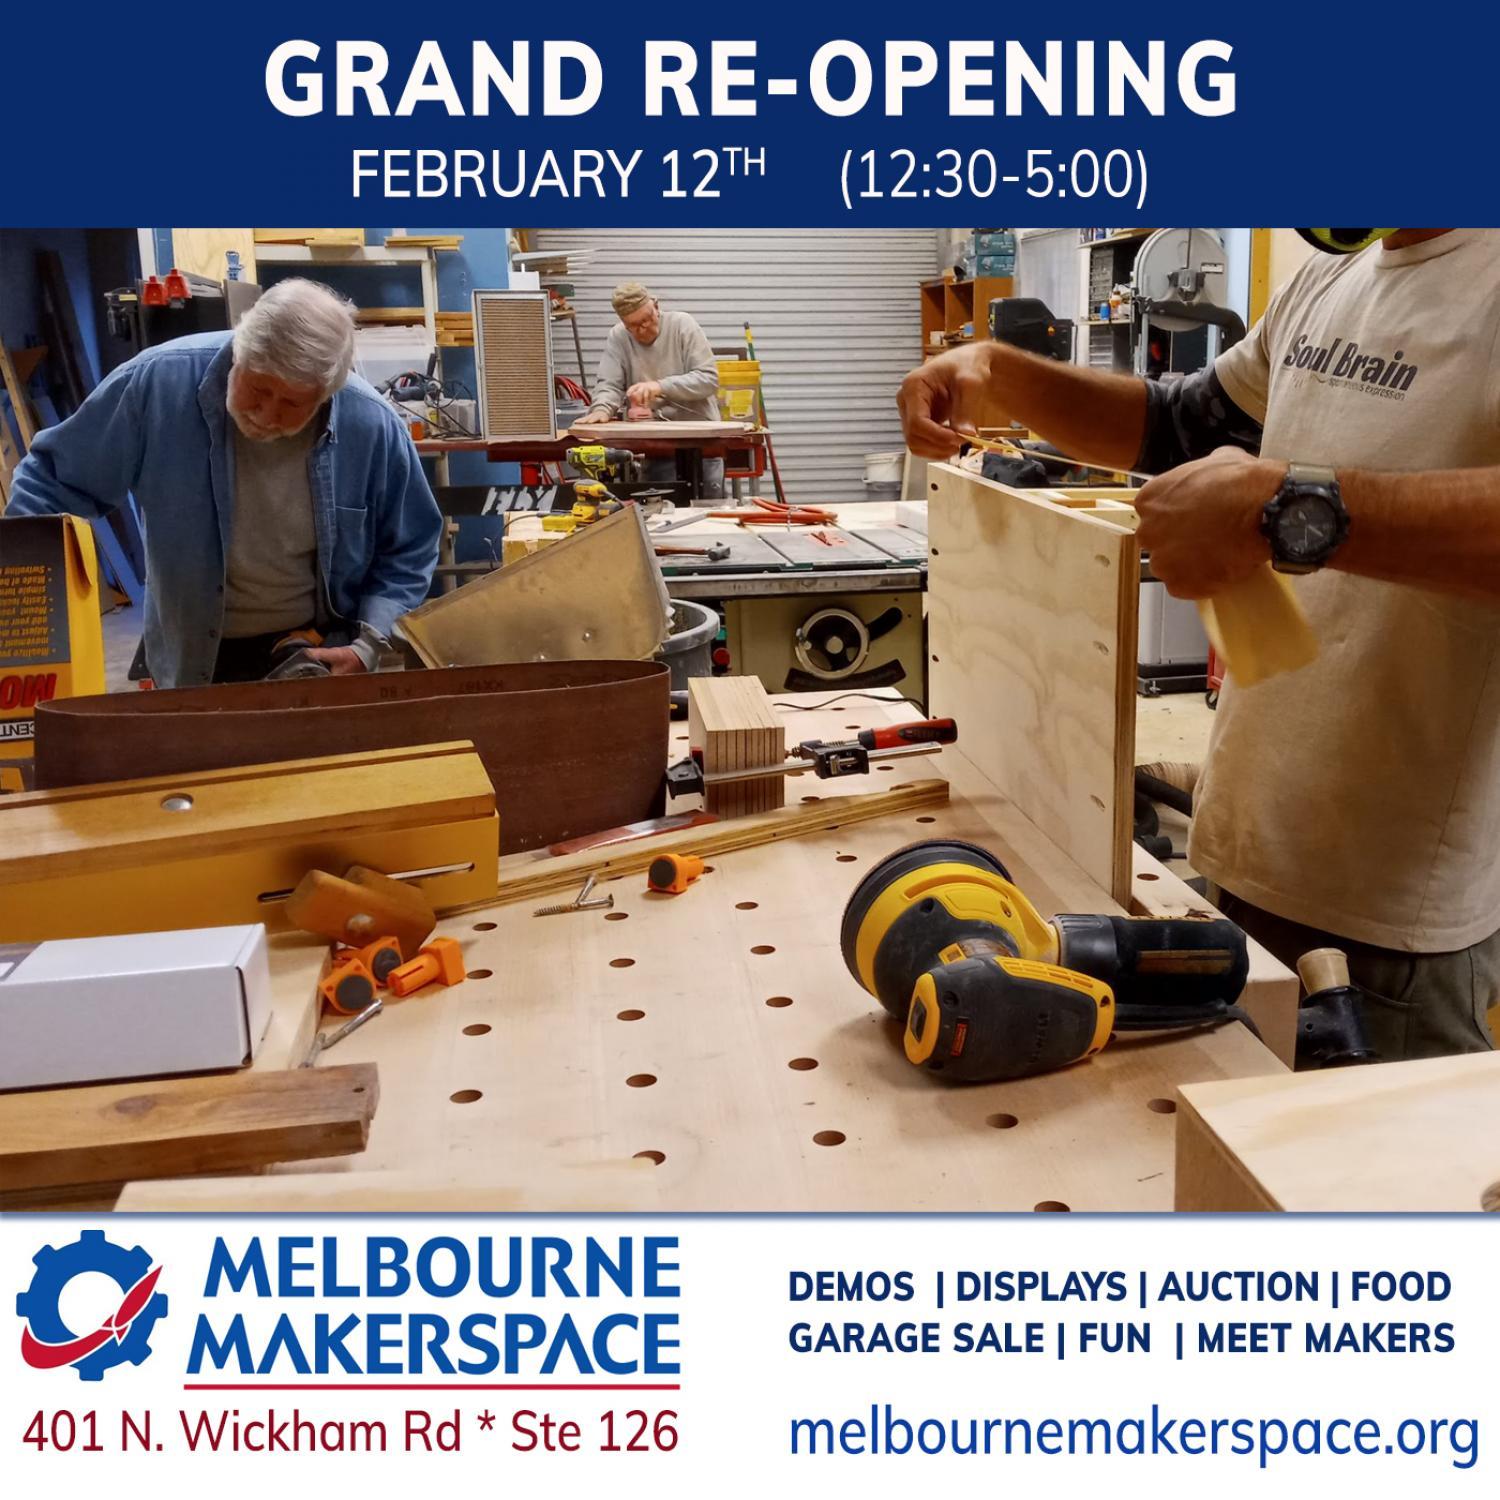 Melbourne Makerspace Grand Re-Opening